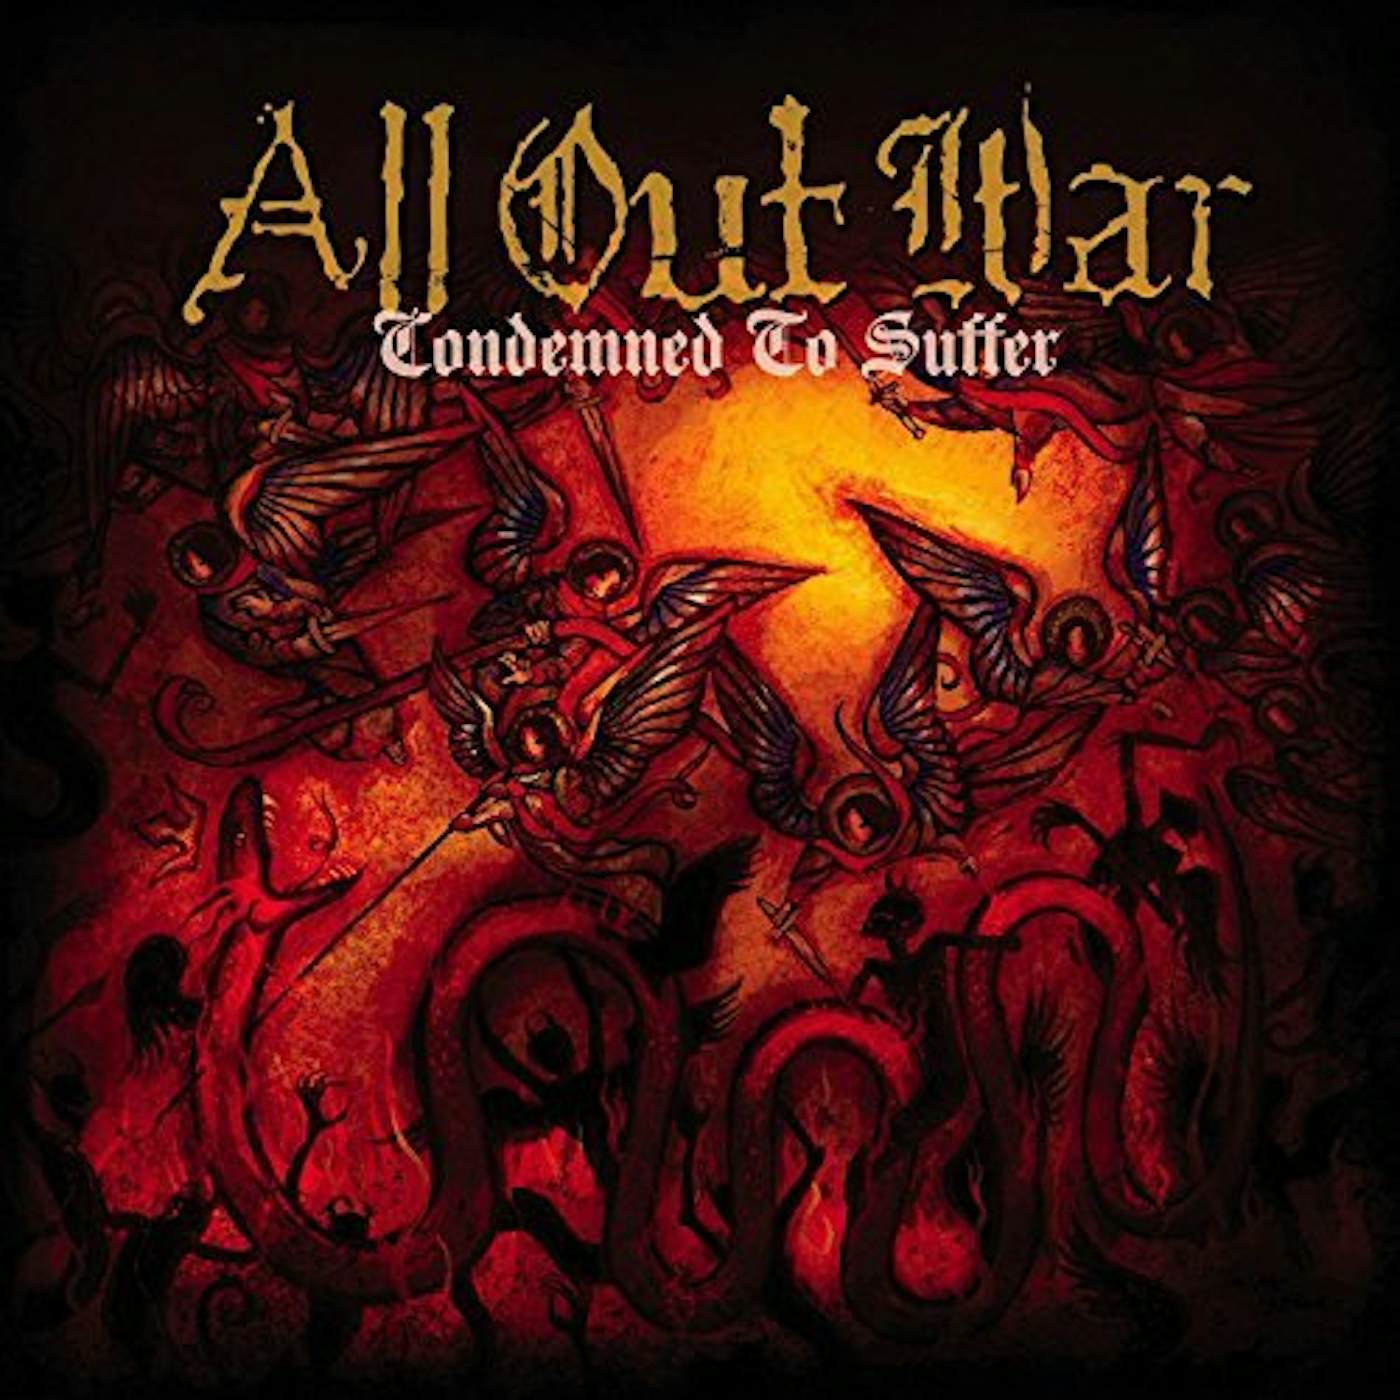 All Out War Condemned to Suffer Vinyl Record